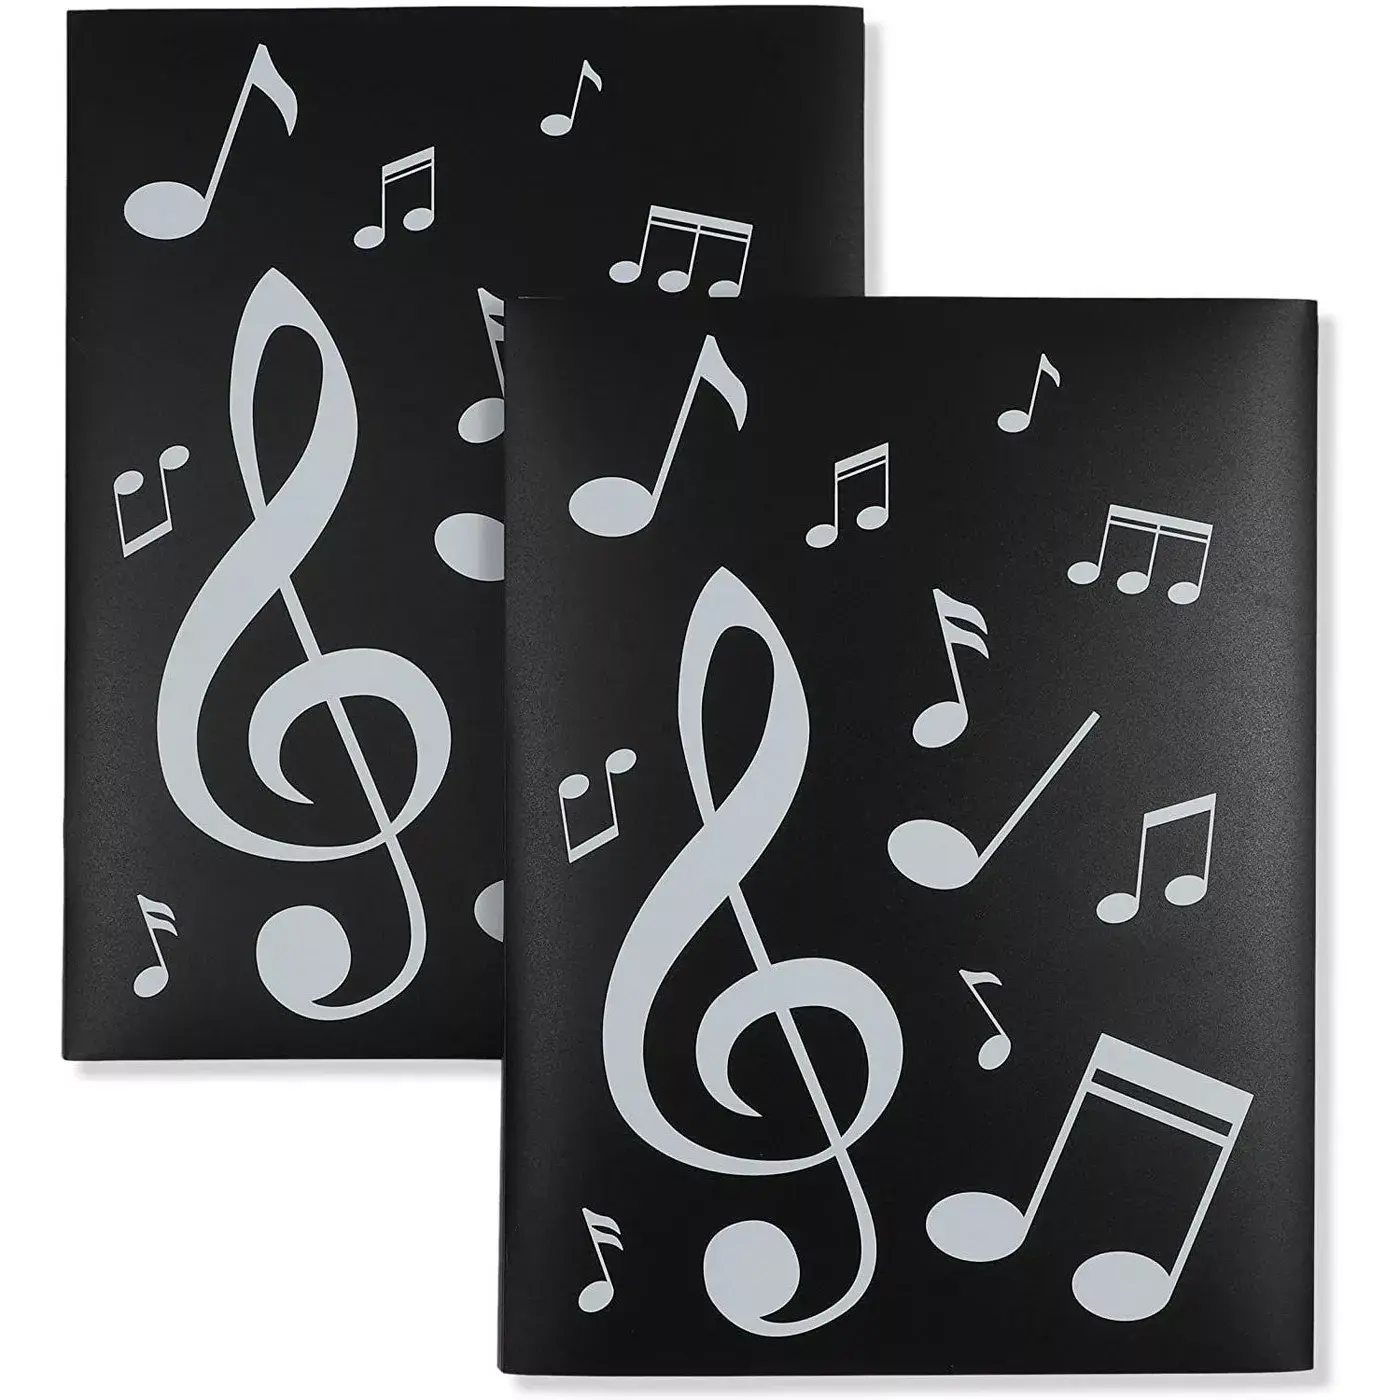 PP Plastic Black Music Folder for Music Sheets Spread to 4-Sided Pockets